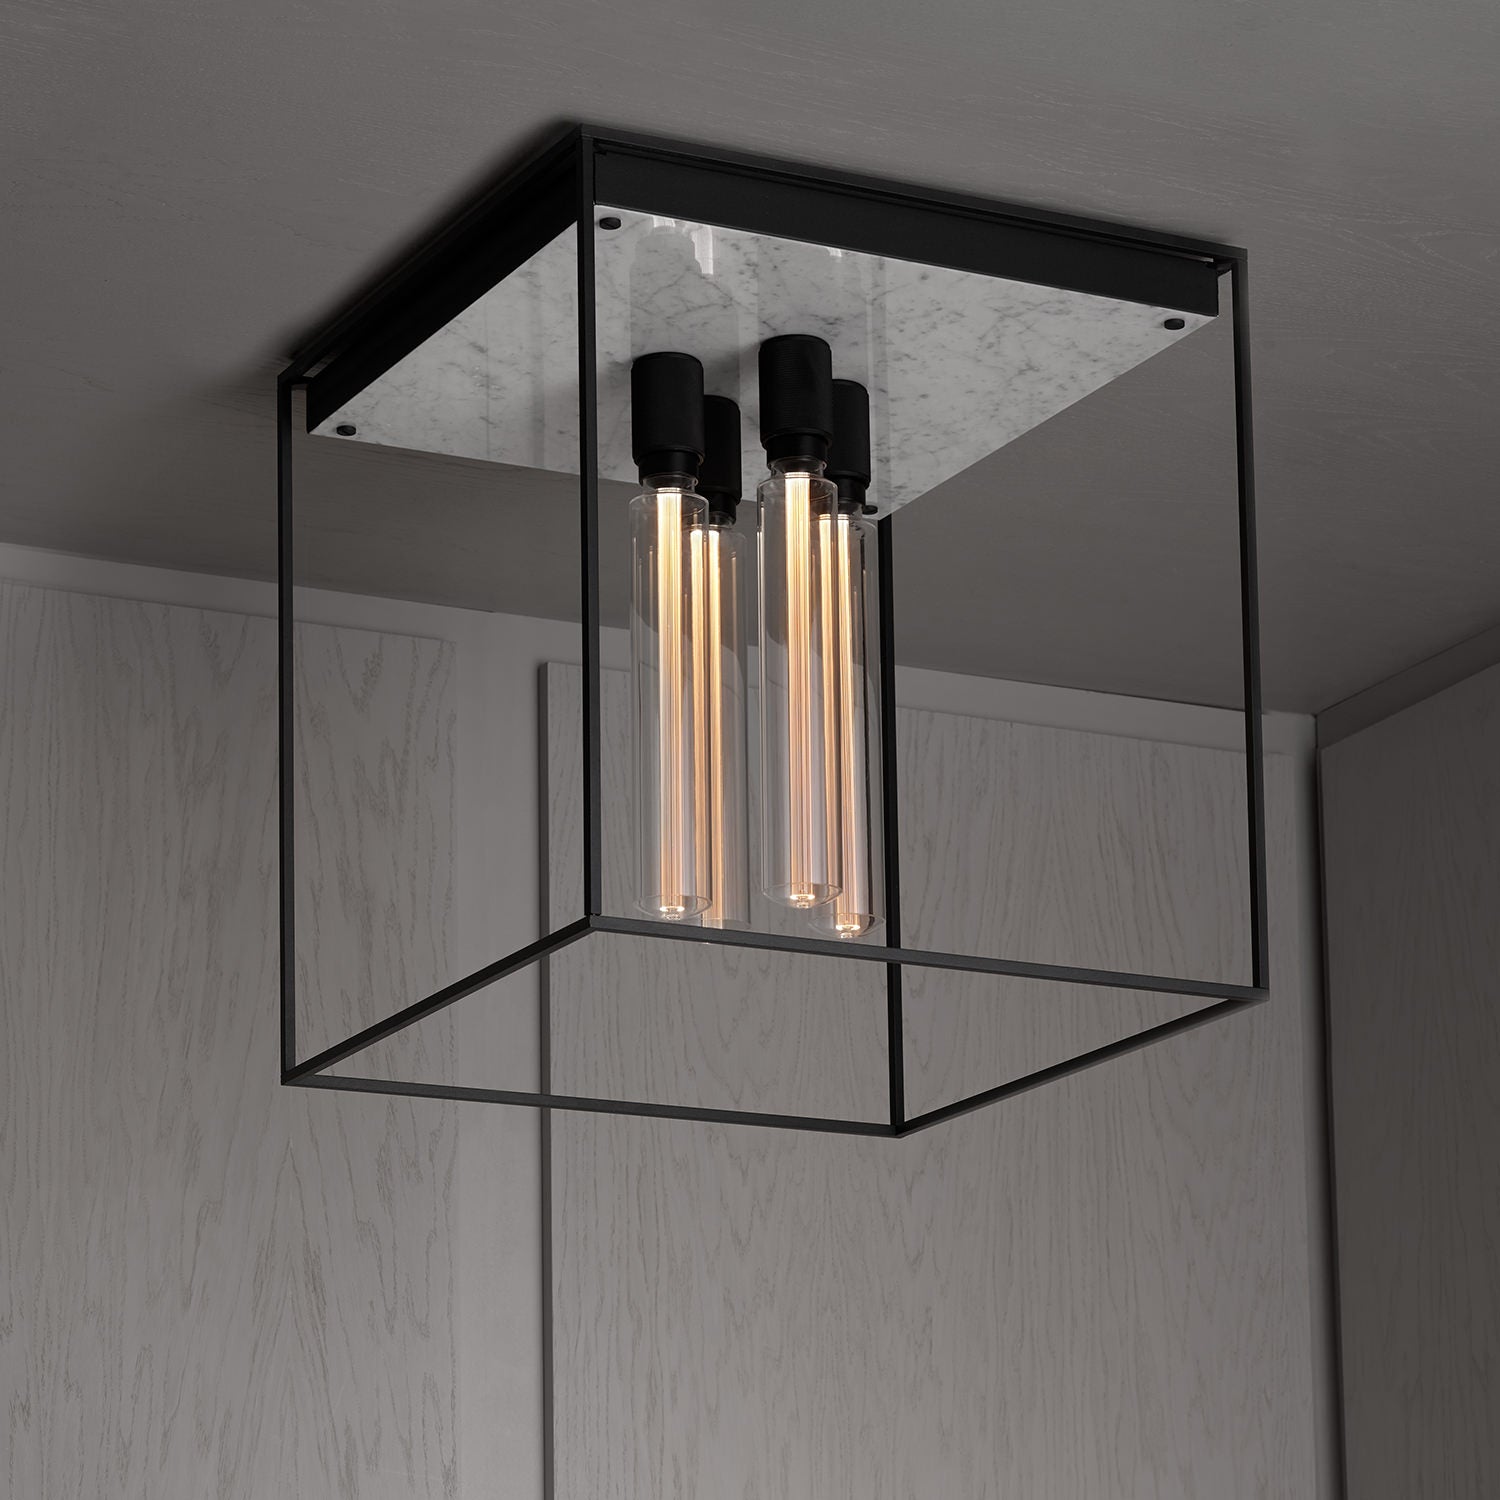 Buster + Punch - Caged Ceiling Light 4.1